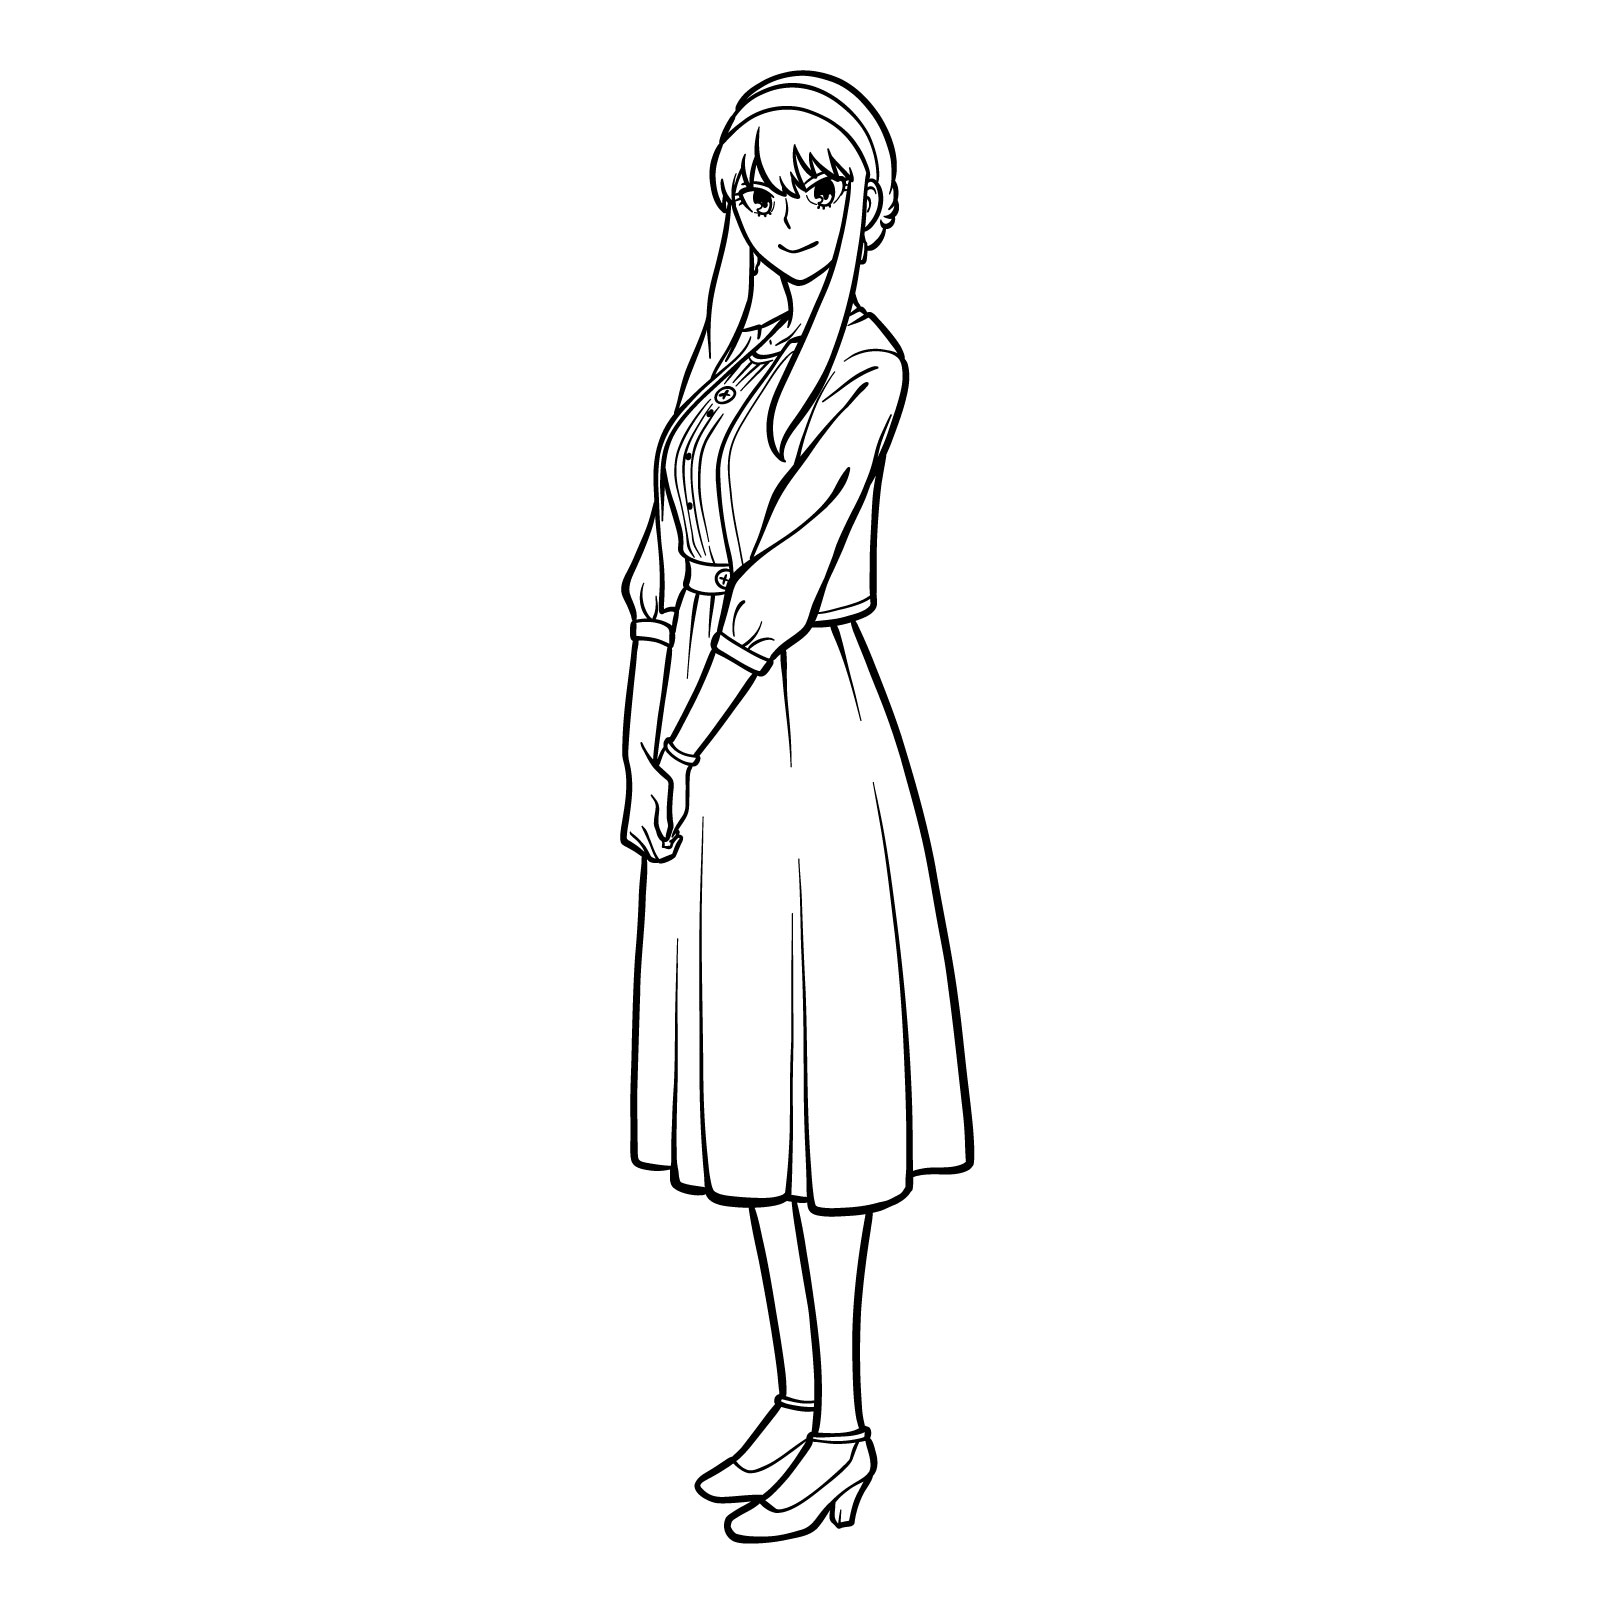 How to draw Yor Forger in her casual clothes - final step